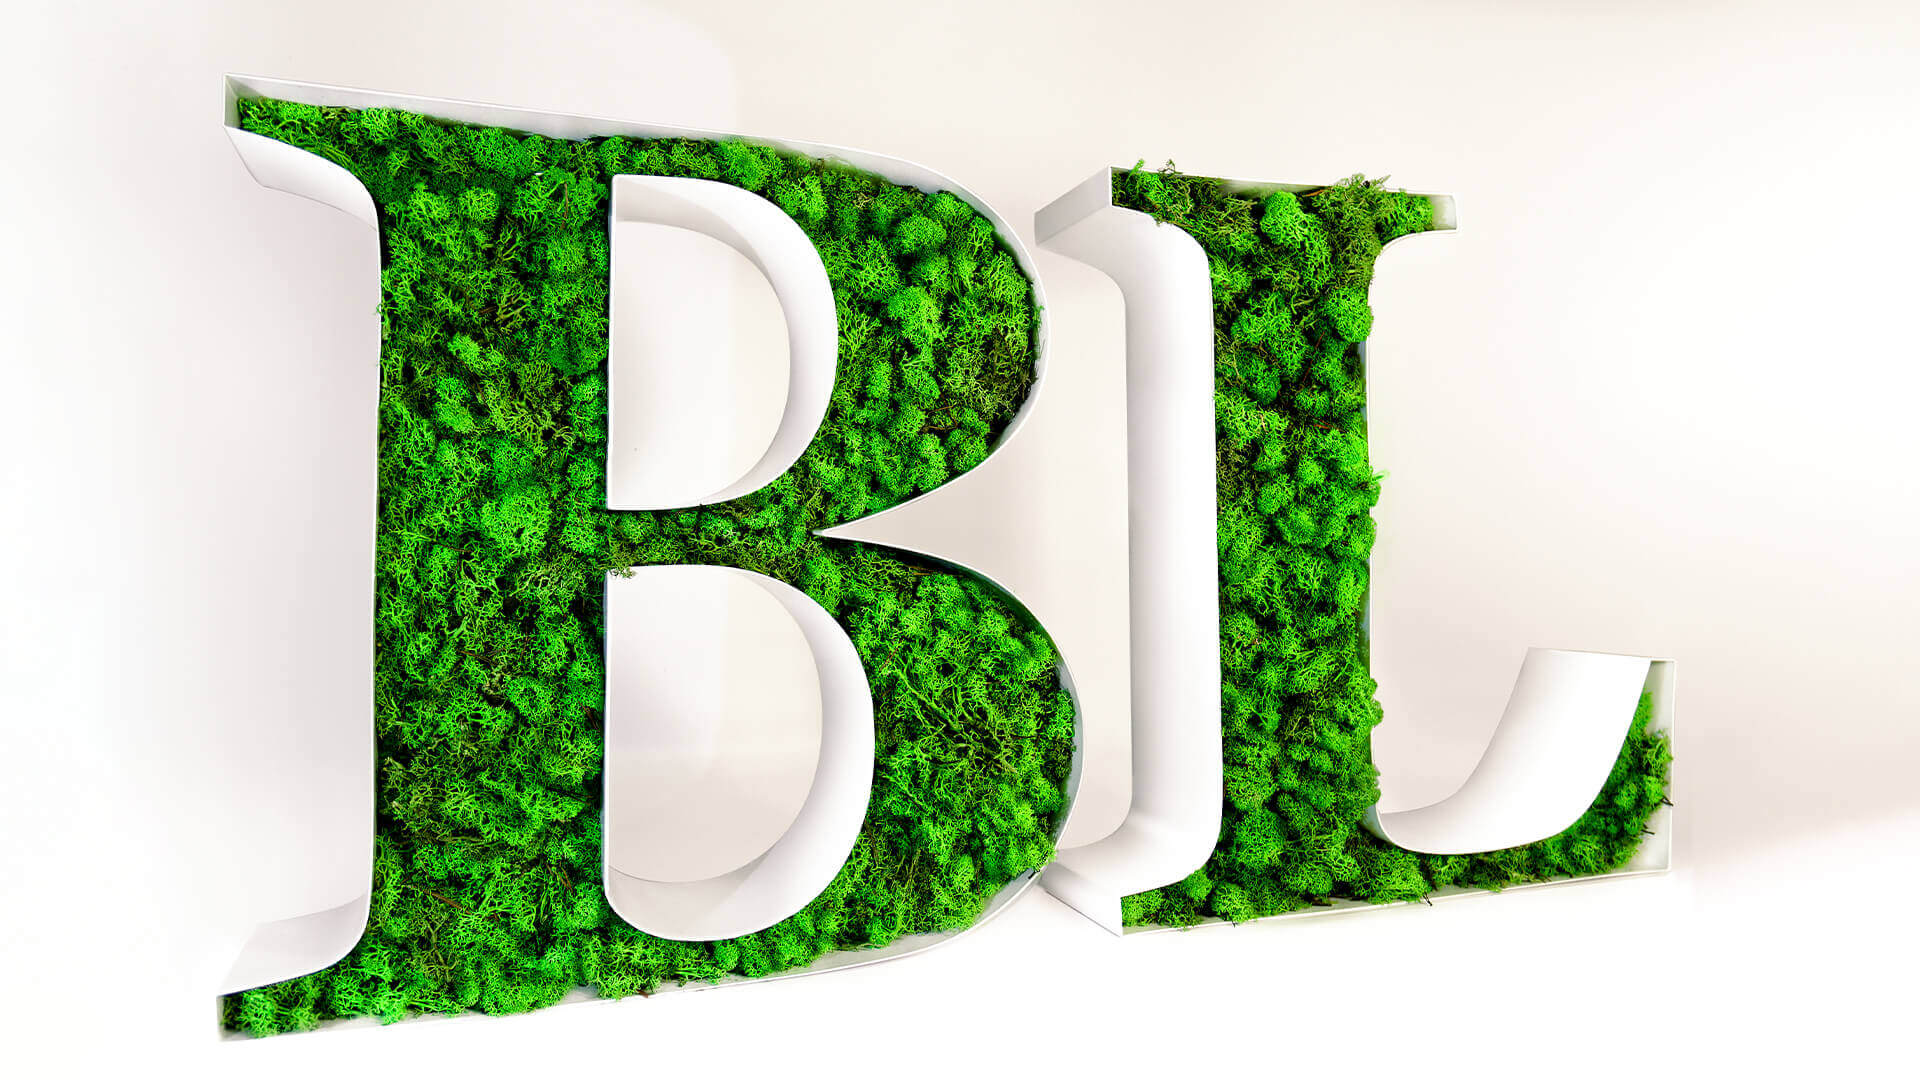 BLO decorative letters - Decorative letters BLO, filled with moss.